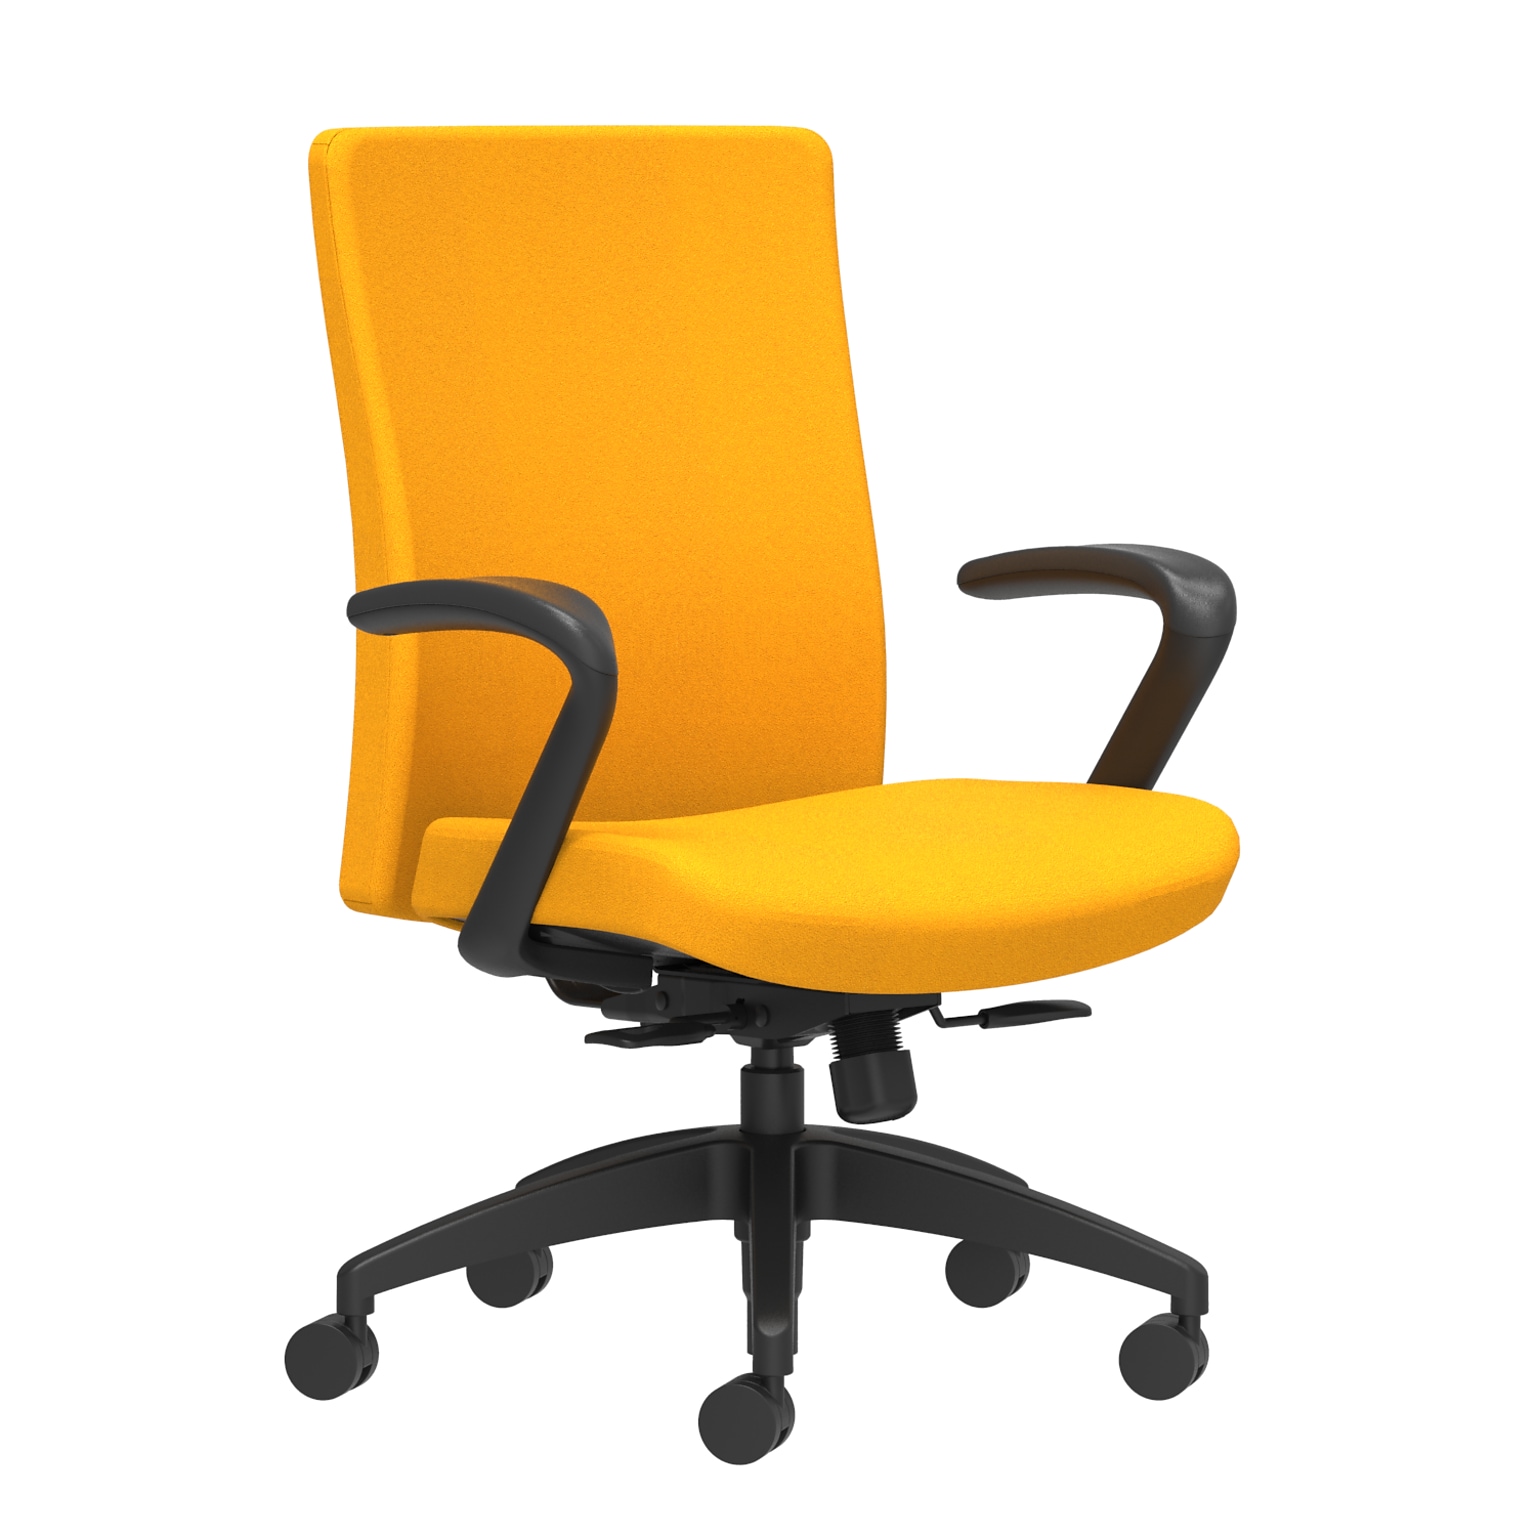 Union & Scale Workplace2.0™ Task Chair Upholstered, Fixed Arms, Goldenrod Fabric, Synchro Tilt (54152)